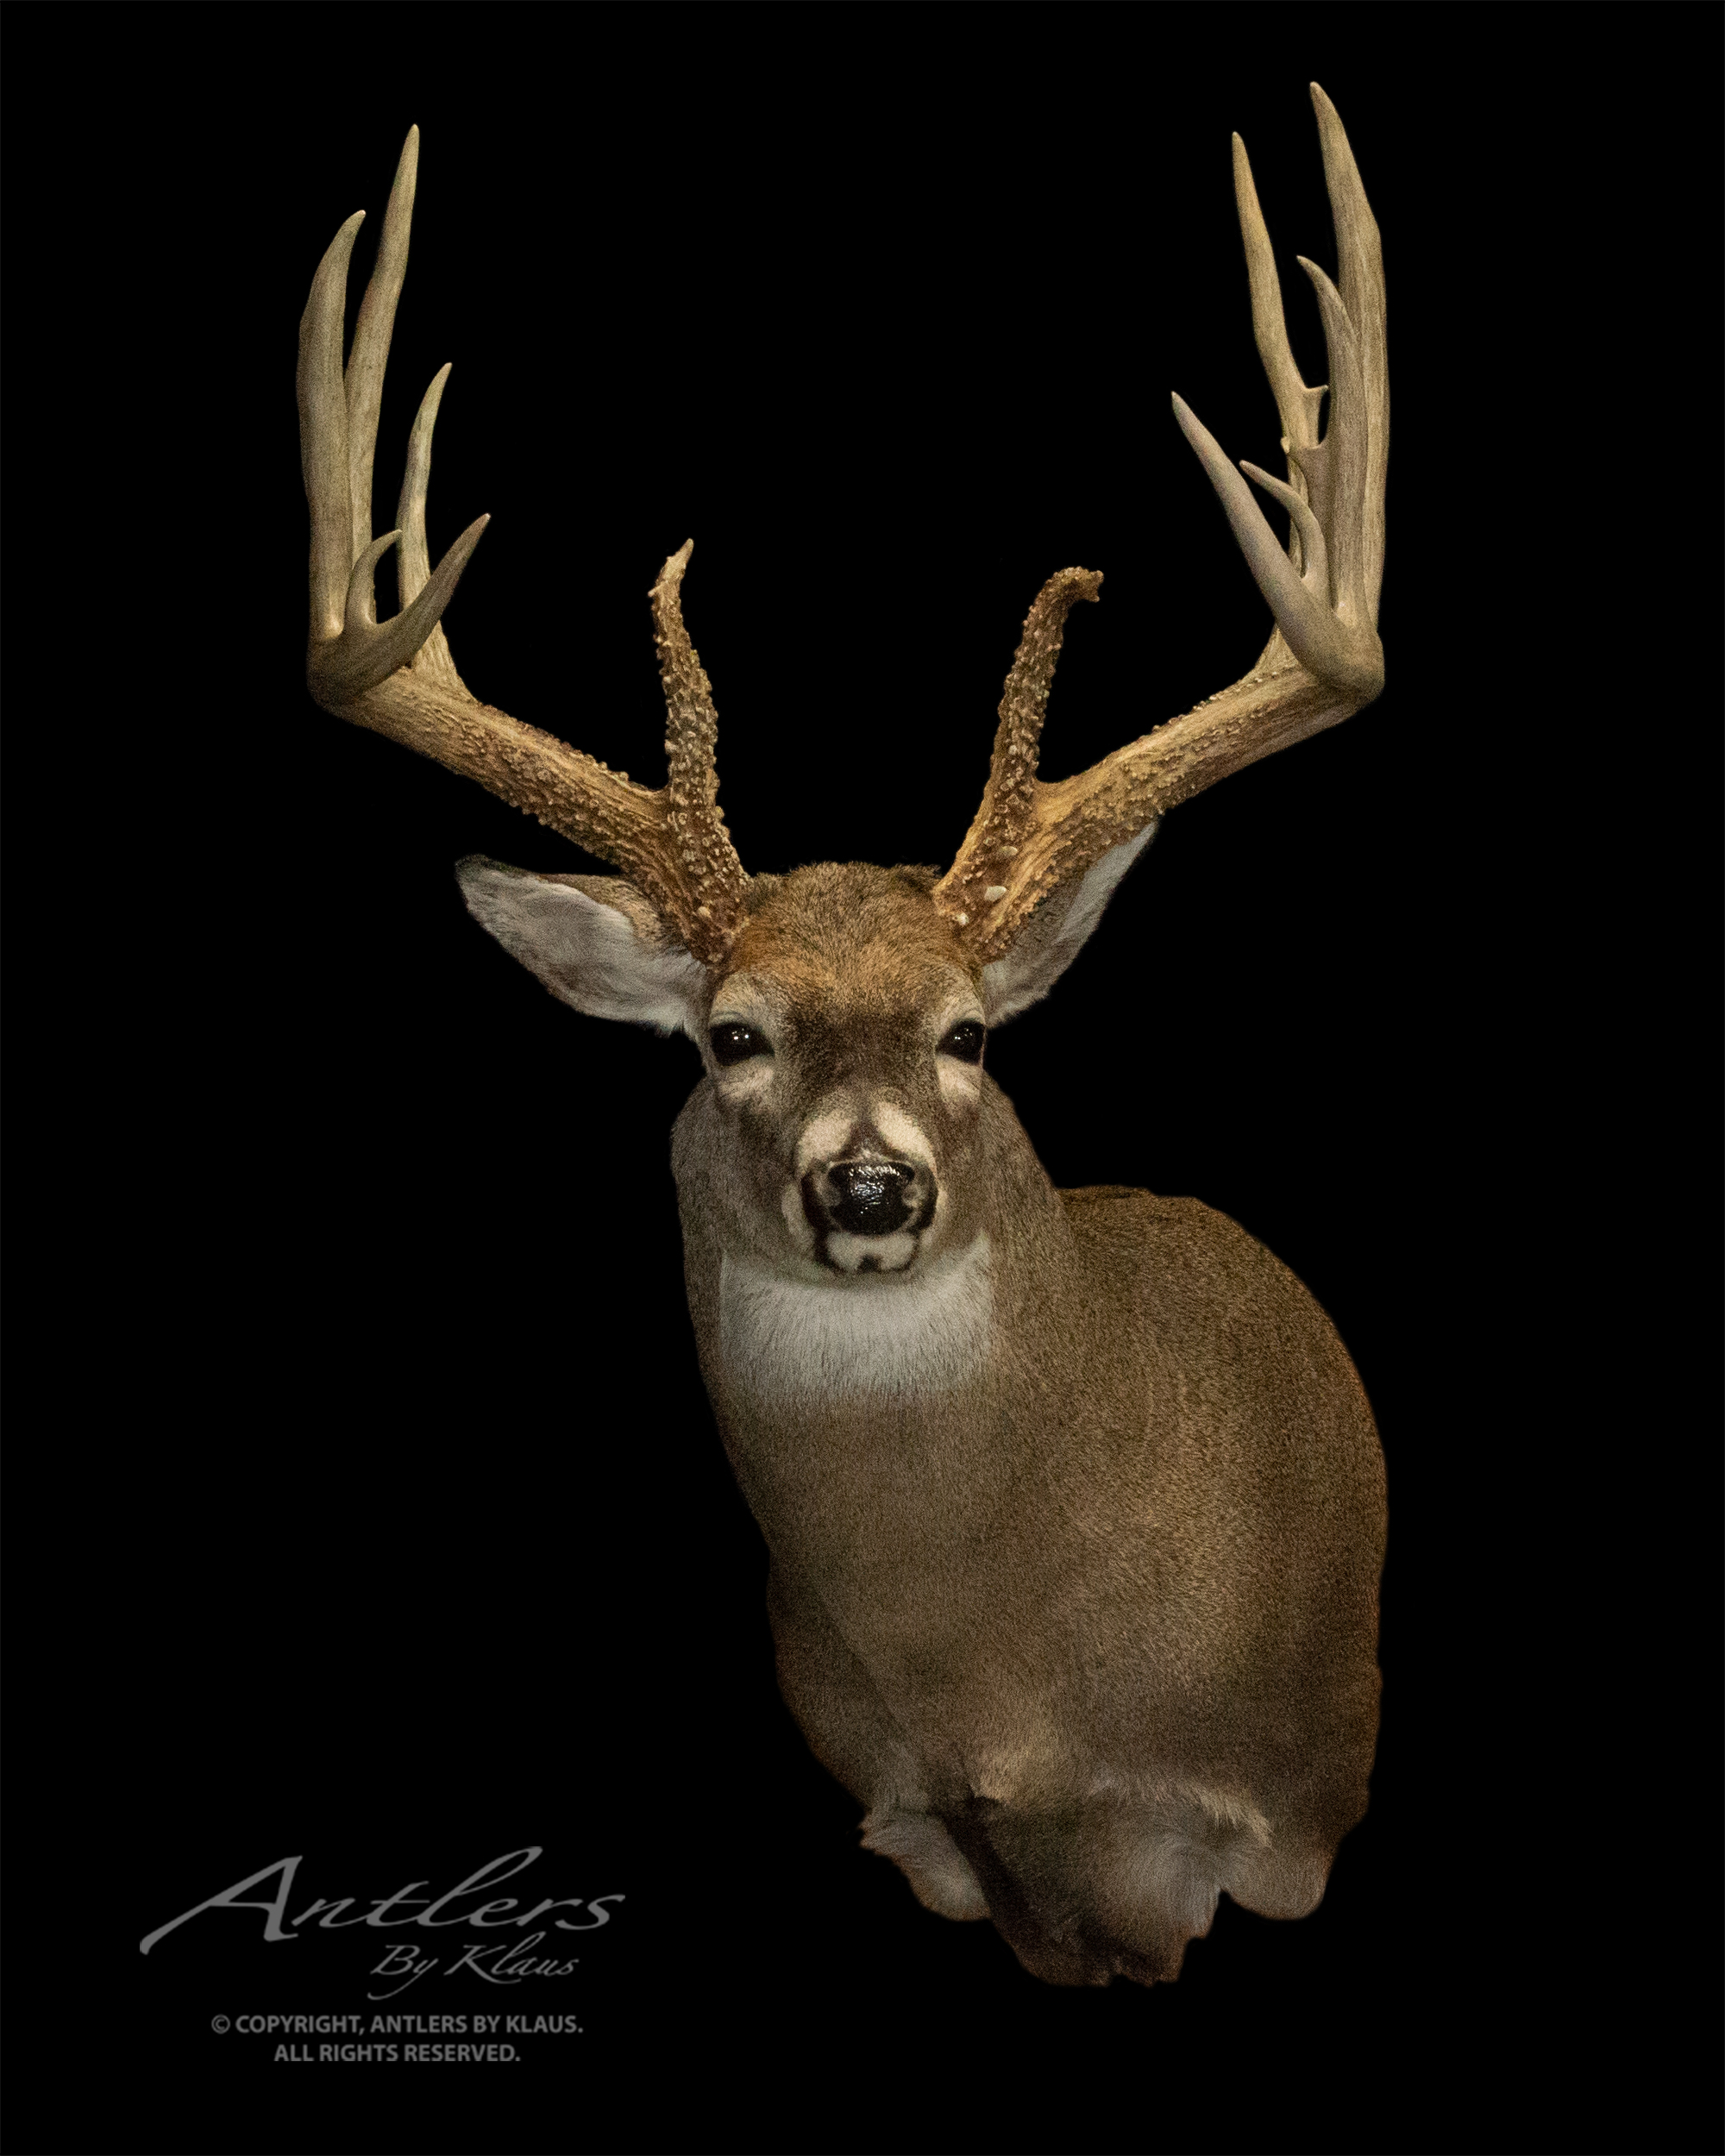 Randy Johnson Sheds - Antlers by Klaus